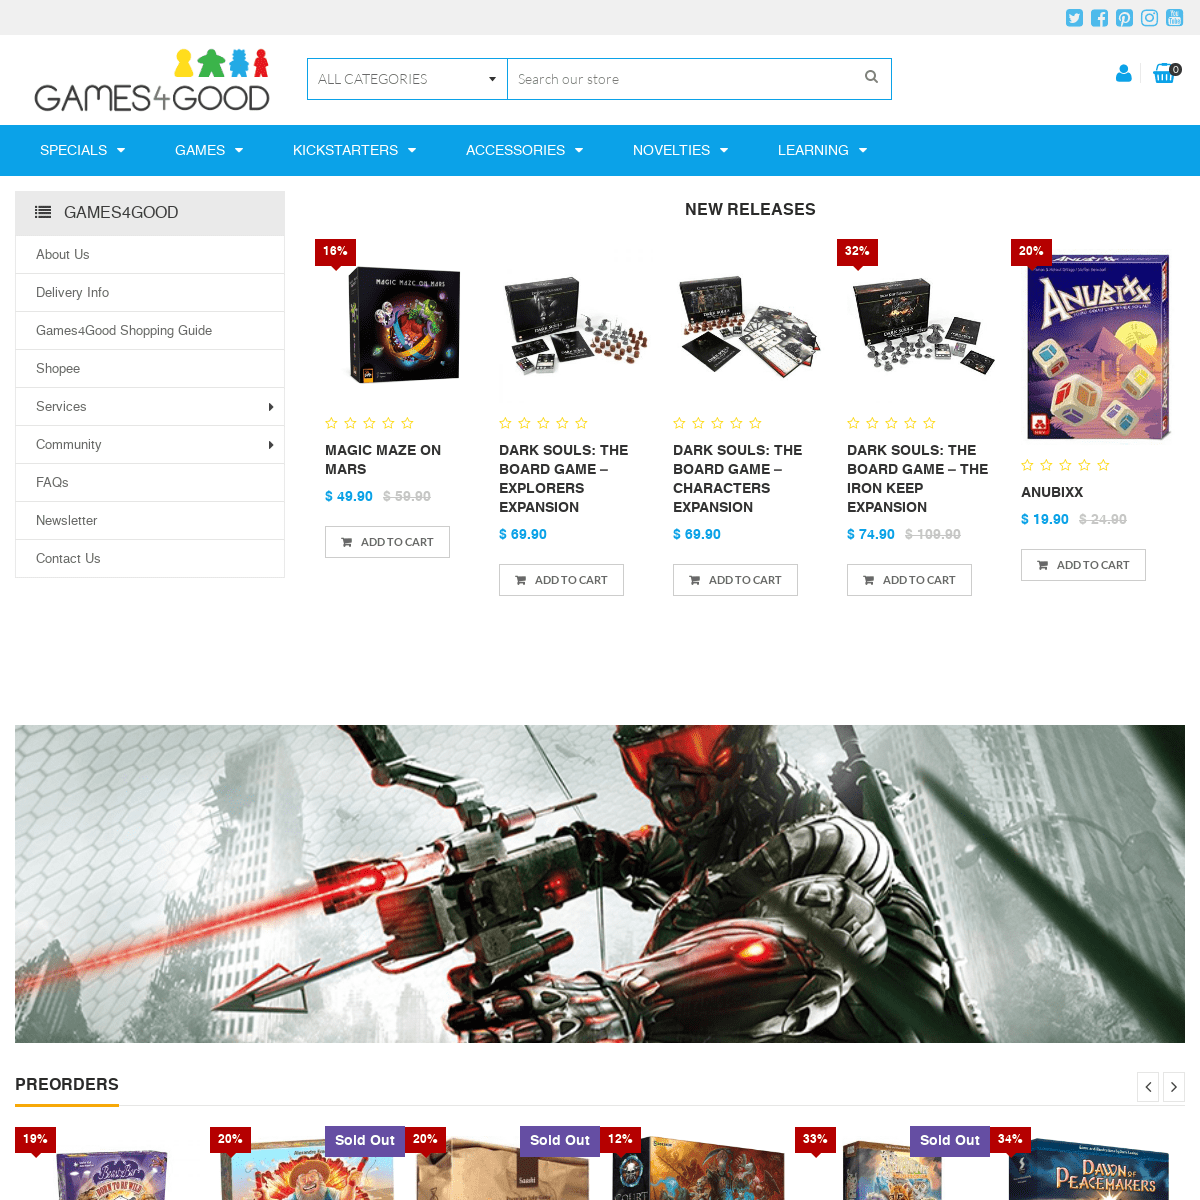 A complete backup of mygames4good.com